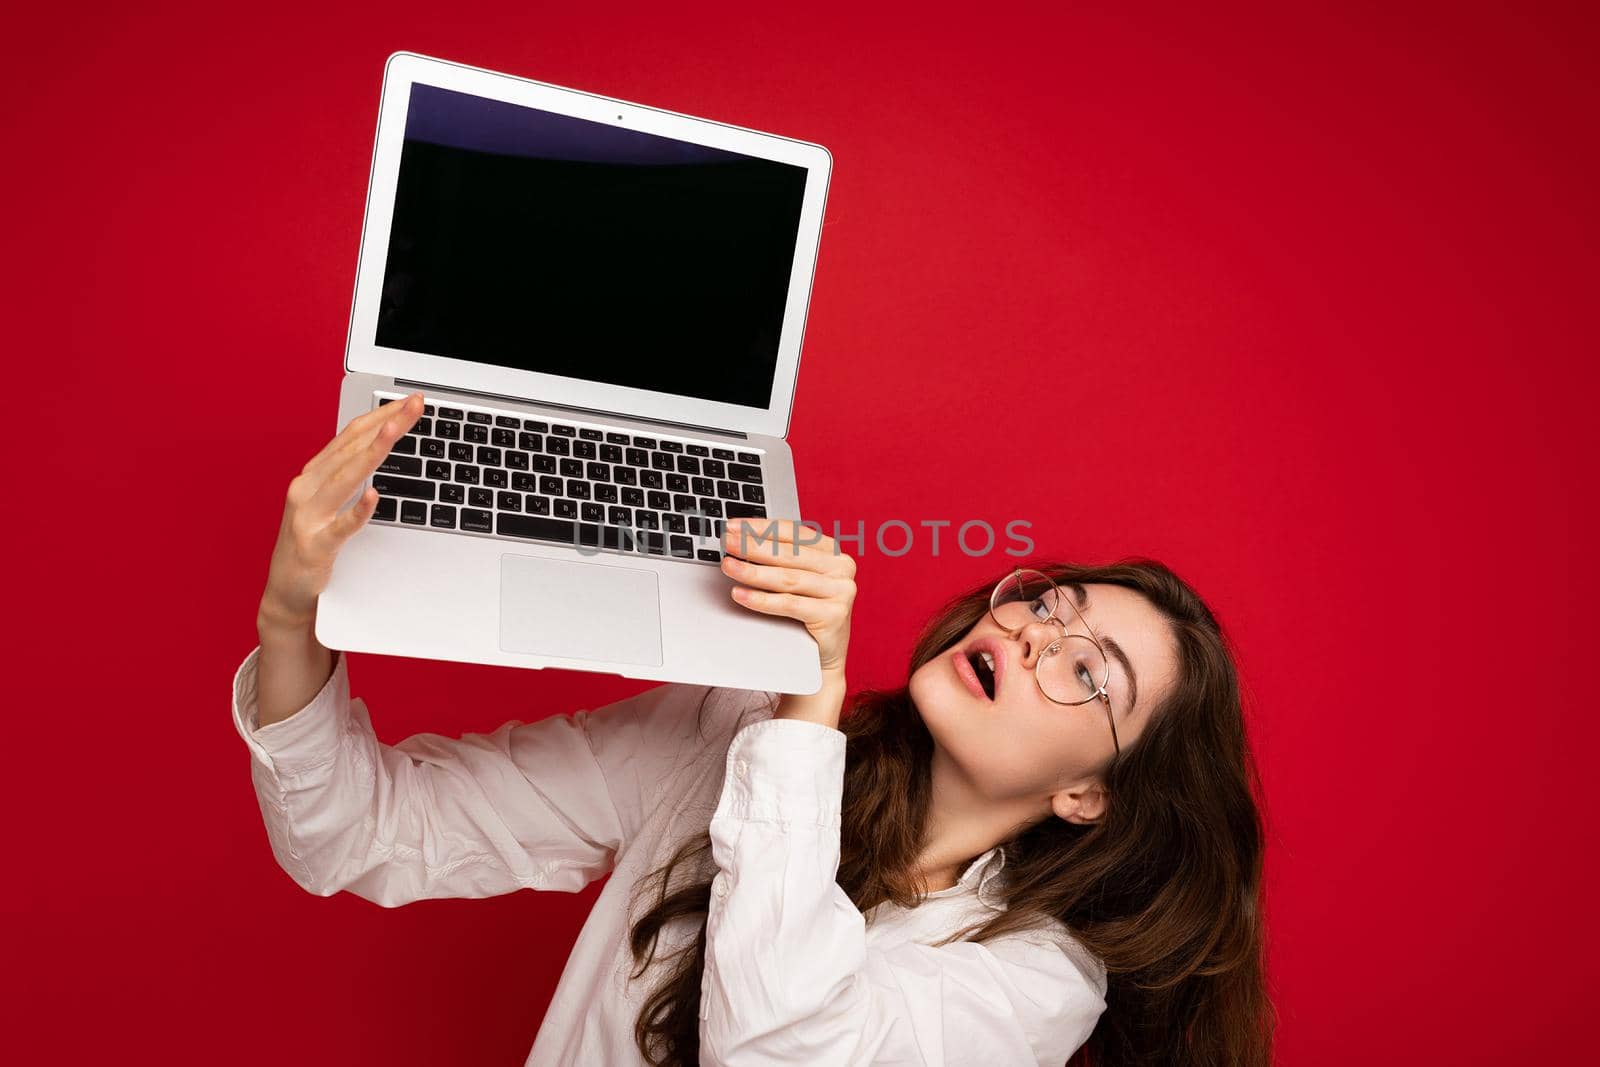 Close-up portrait of Beautiful smiling happy young woman holding computer laptop looking at netbook having fun wearing casual smart clothes isolated over wall background. Copy empty space